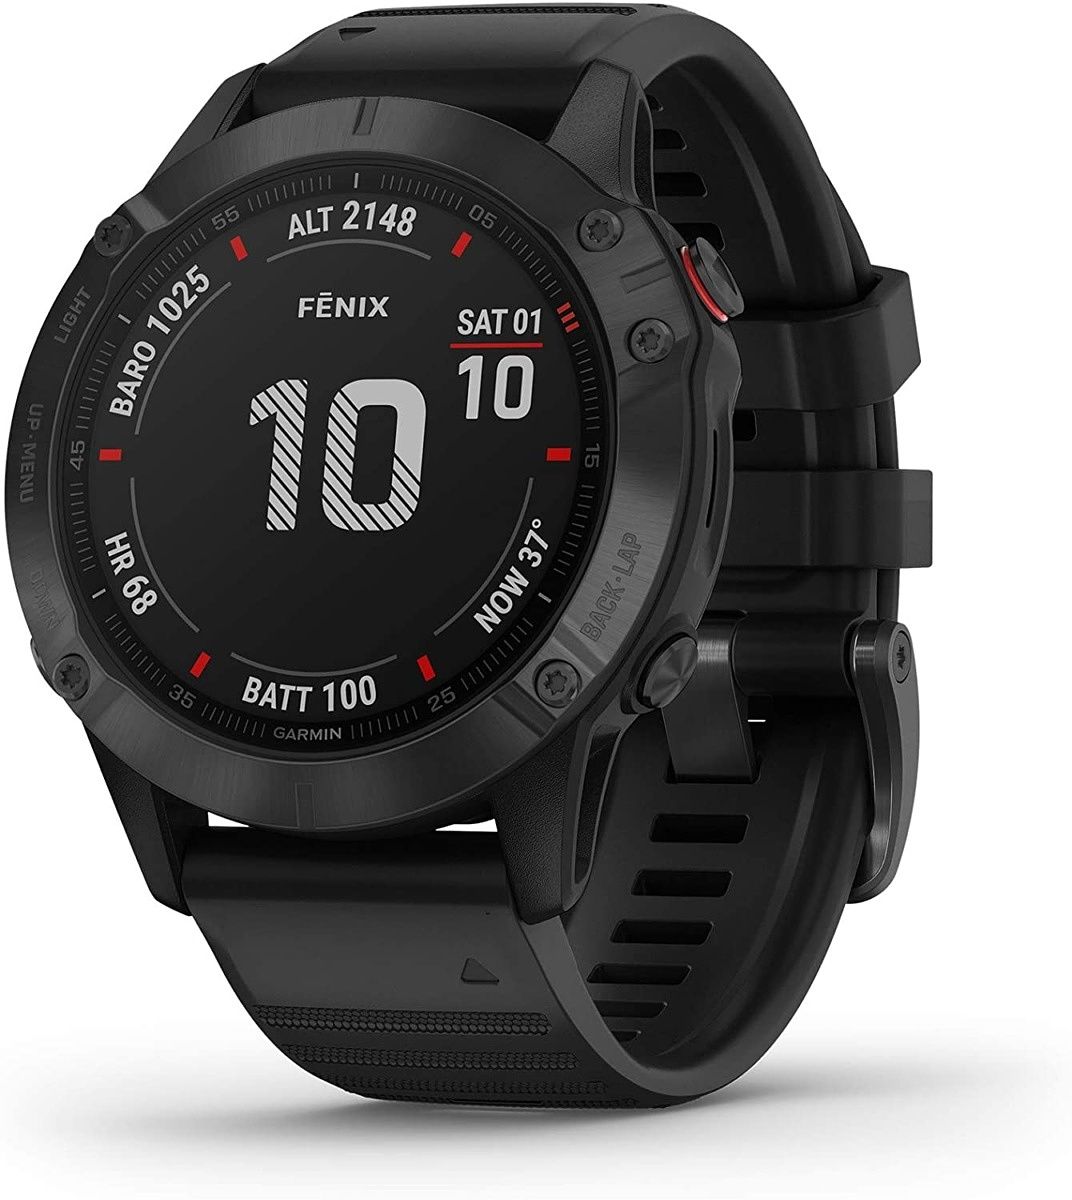 The Garmin Fenix 6 Pro is one of the best premium rugged smartwatches, with military certification, fitness tracking, and more.